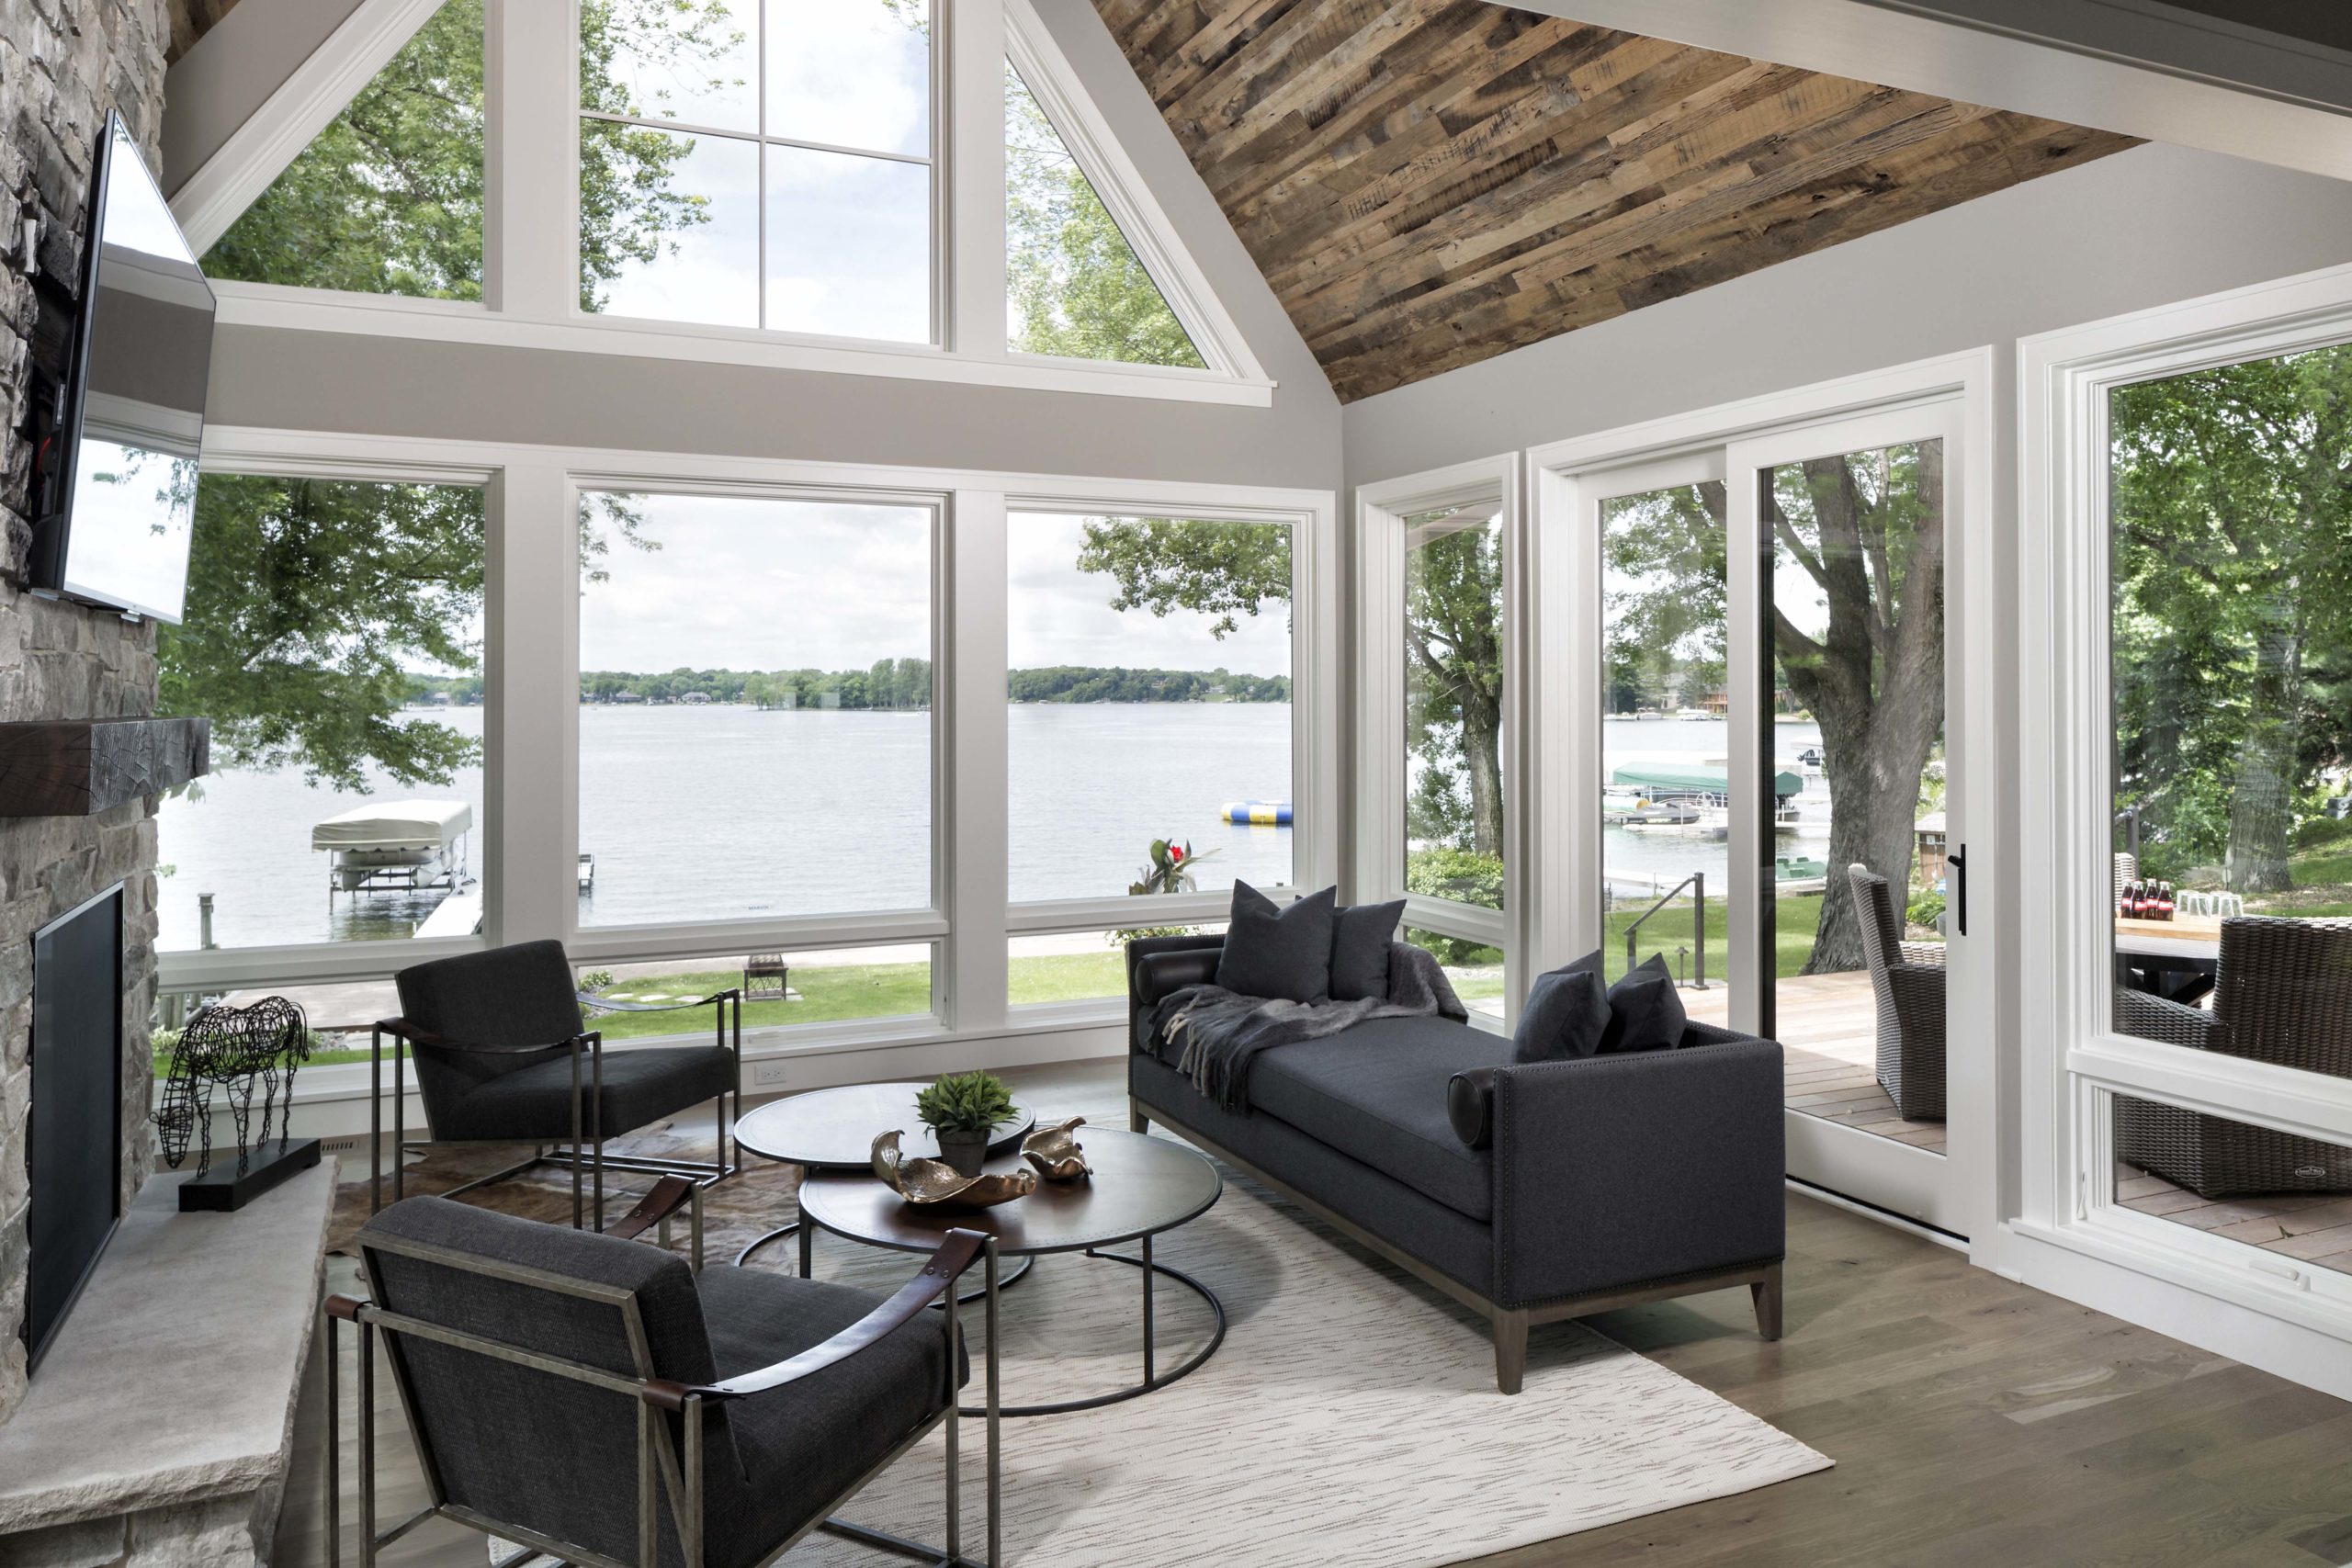 A living room with large windows overlooking a lake.